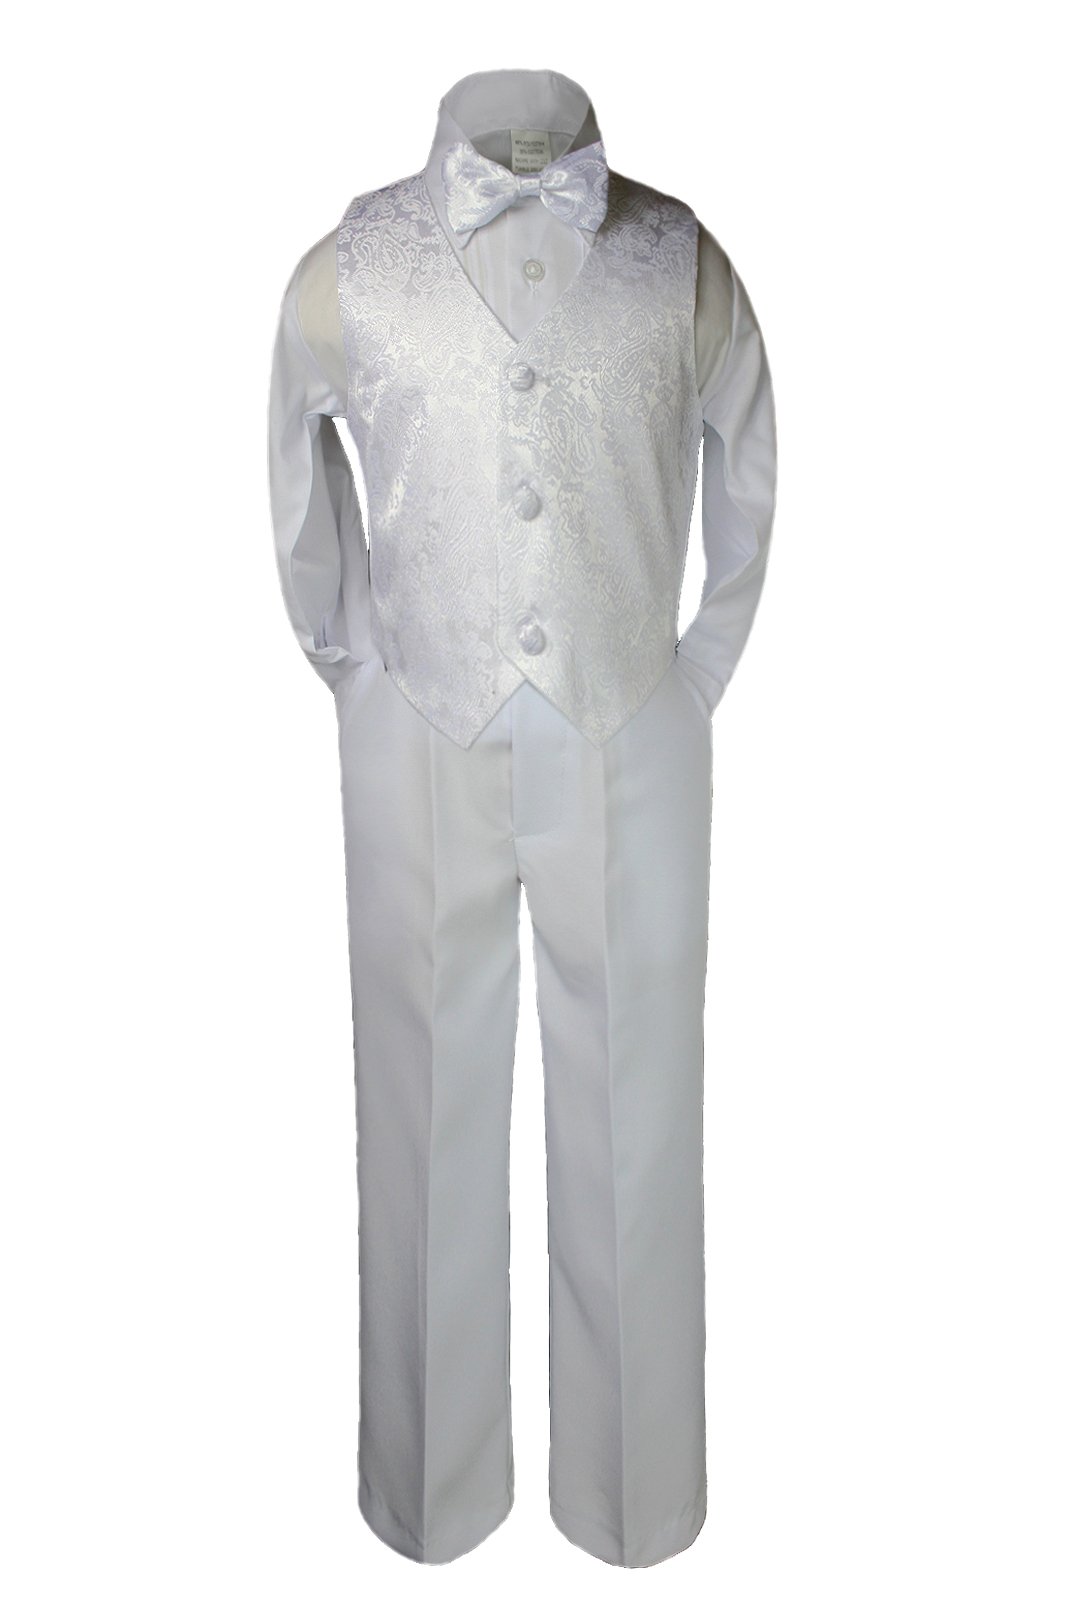 Unotux Baby Boys Christening Baptism White Vest Sets Suits Bow Tie Sz 0-7 Years